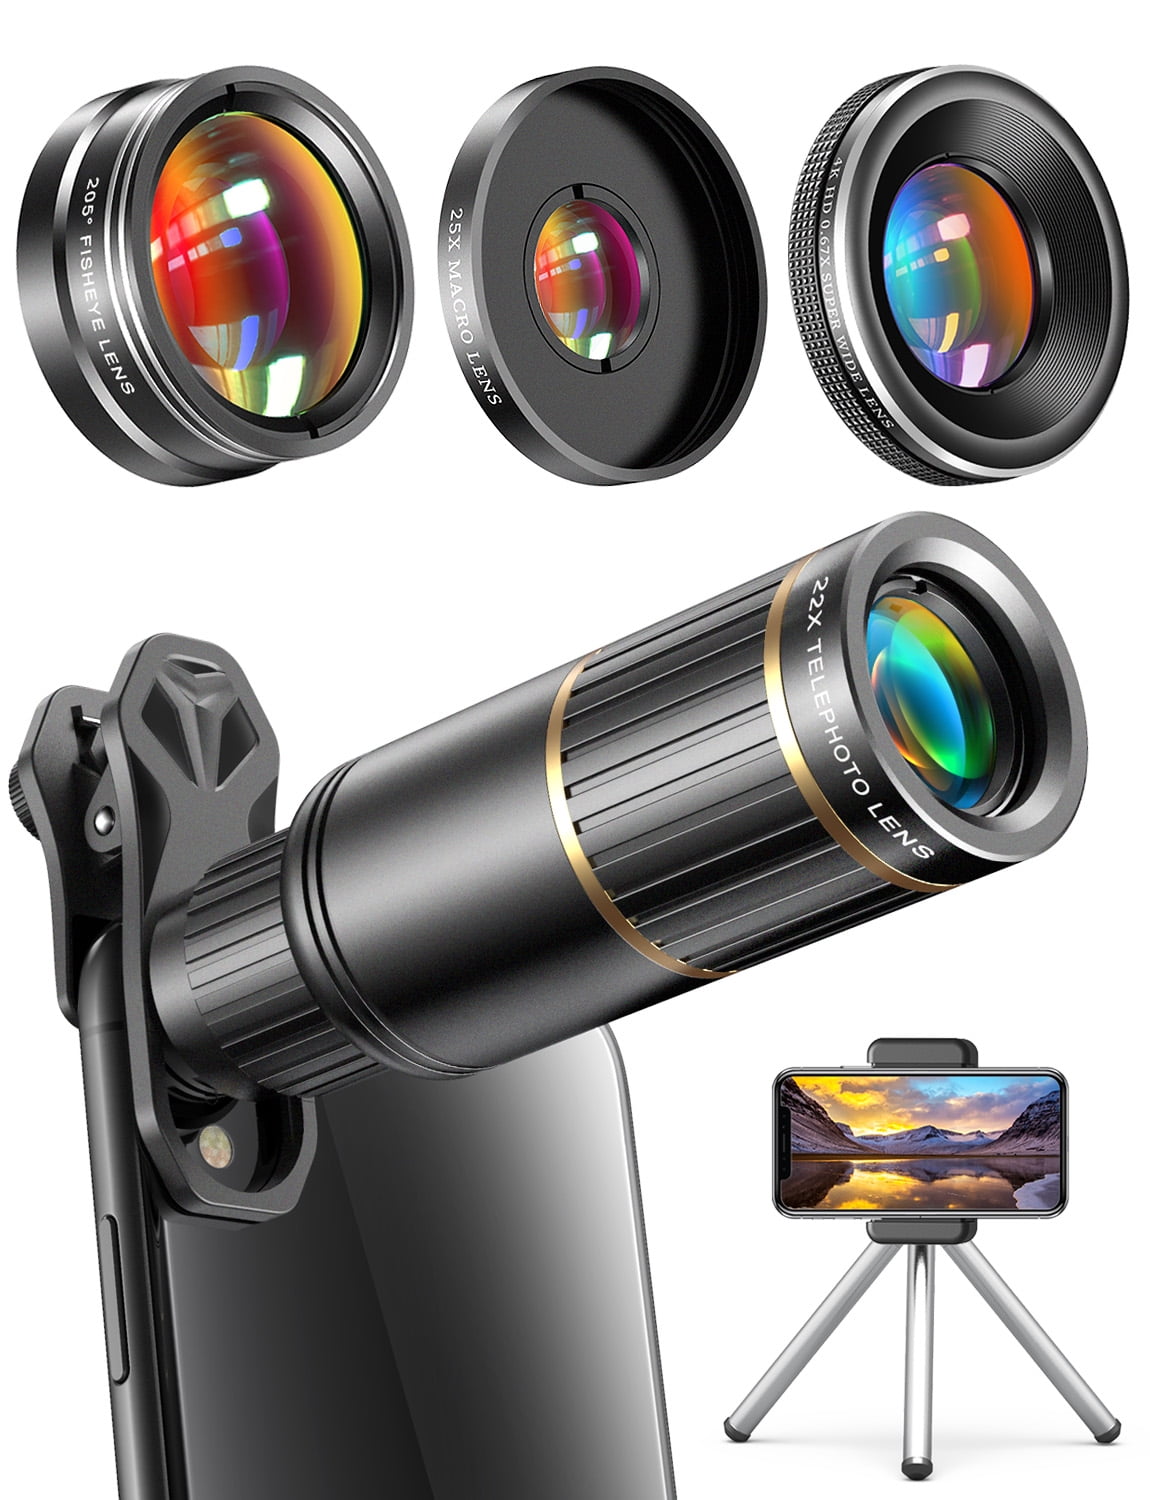 PIANUO Pro Lens Kit for iPhone and Android 0.45X Super Wide Angle Lens & 12.5X Macro Lens 2 in 1 HD Cell Phone Camera Lens Kit for iPhone X 8 7 6S 6S Plus 6 5S Samsung Android Smartphones